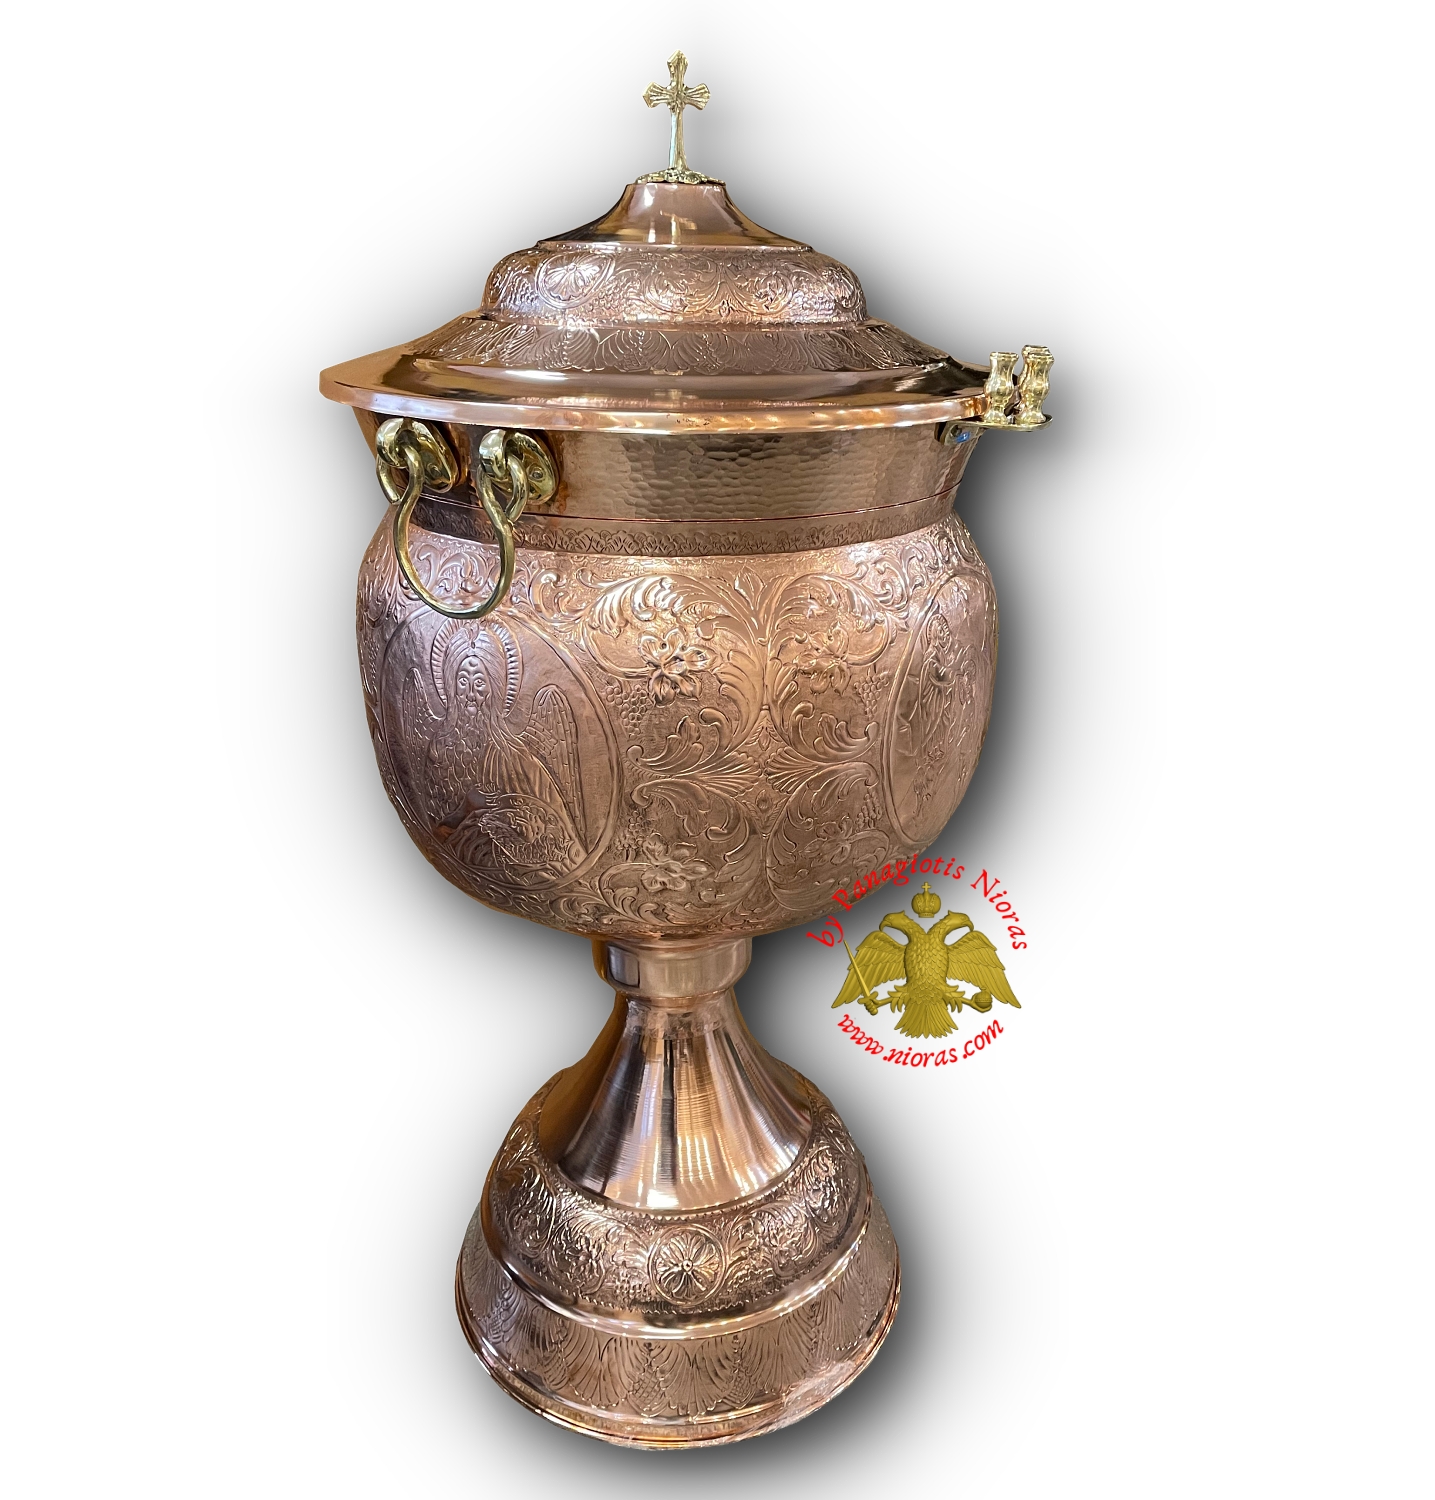 Baptismal Font Copper Hand Carved Baptism in the Body with Cover Lid and Water Collection Tank